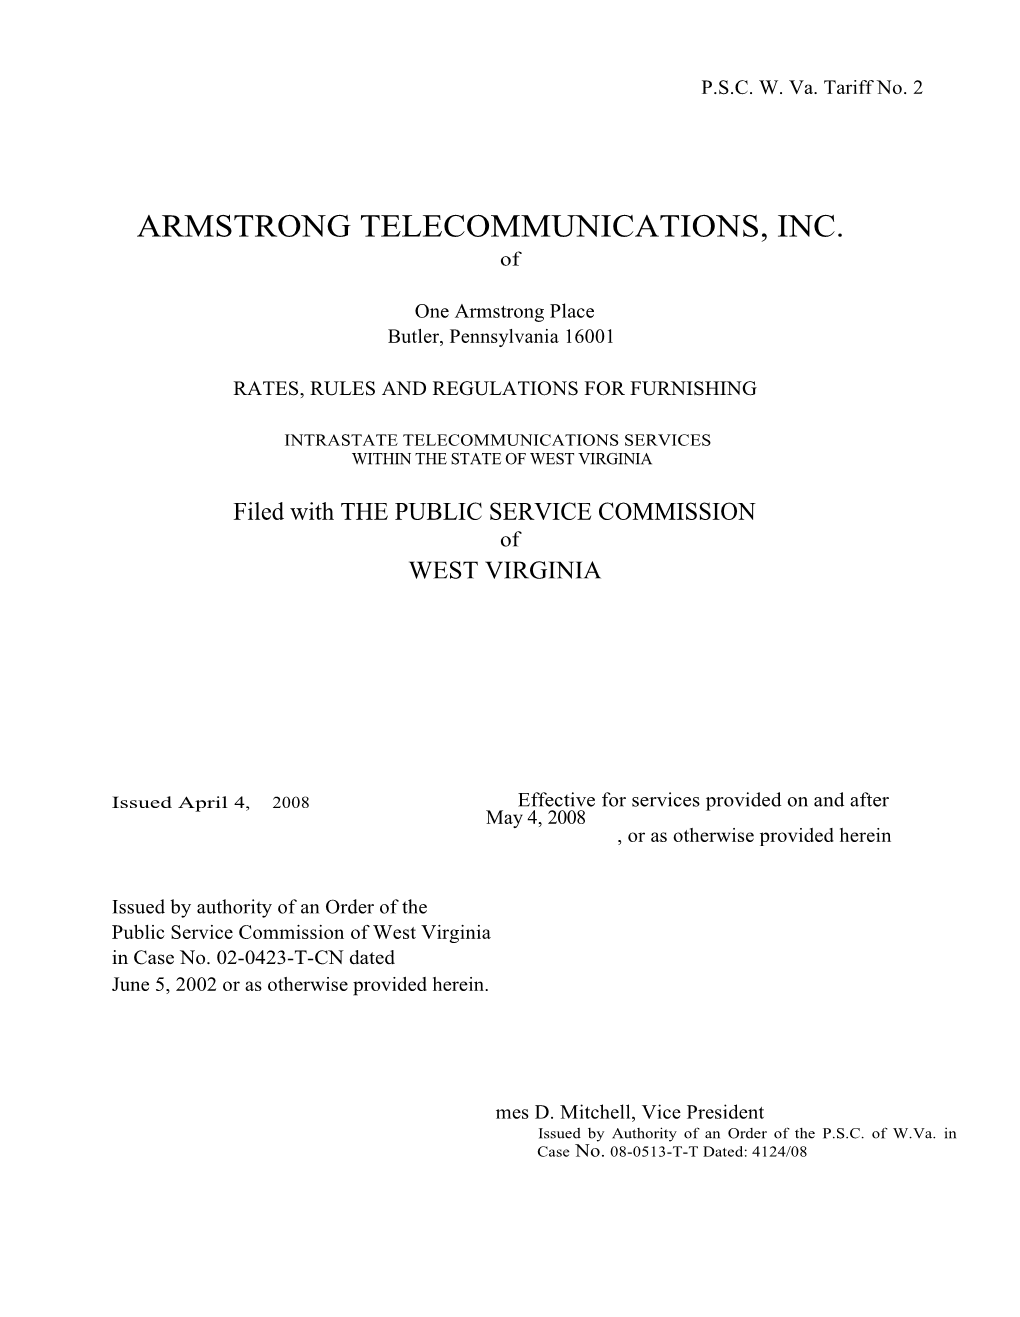 ARMSTRONG TELECOMMUNICATIONS, INC. Of